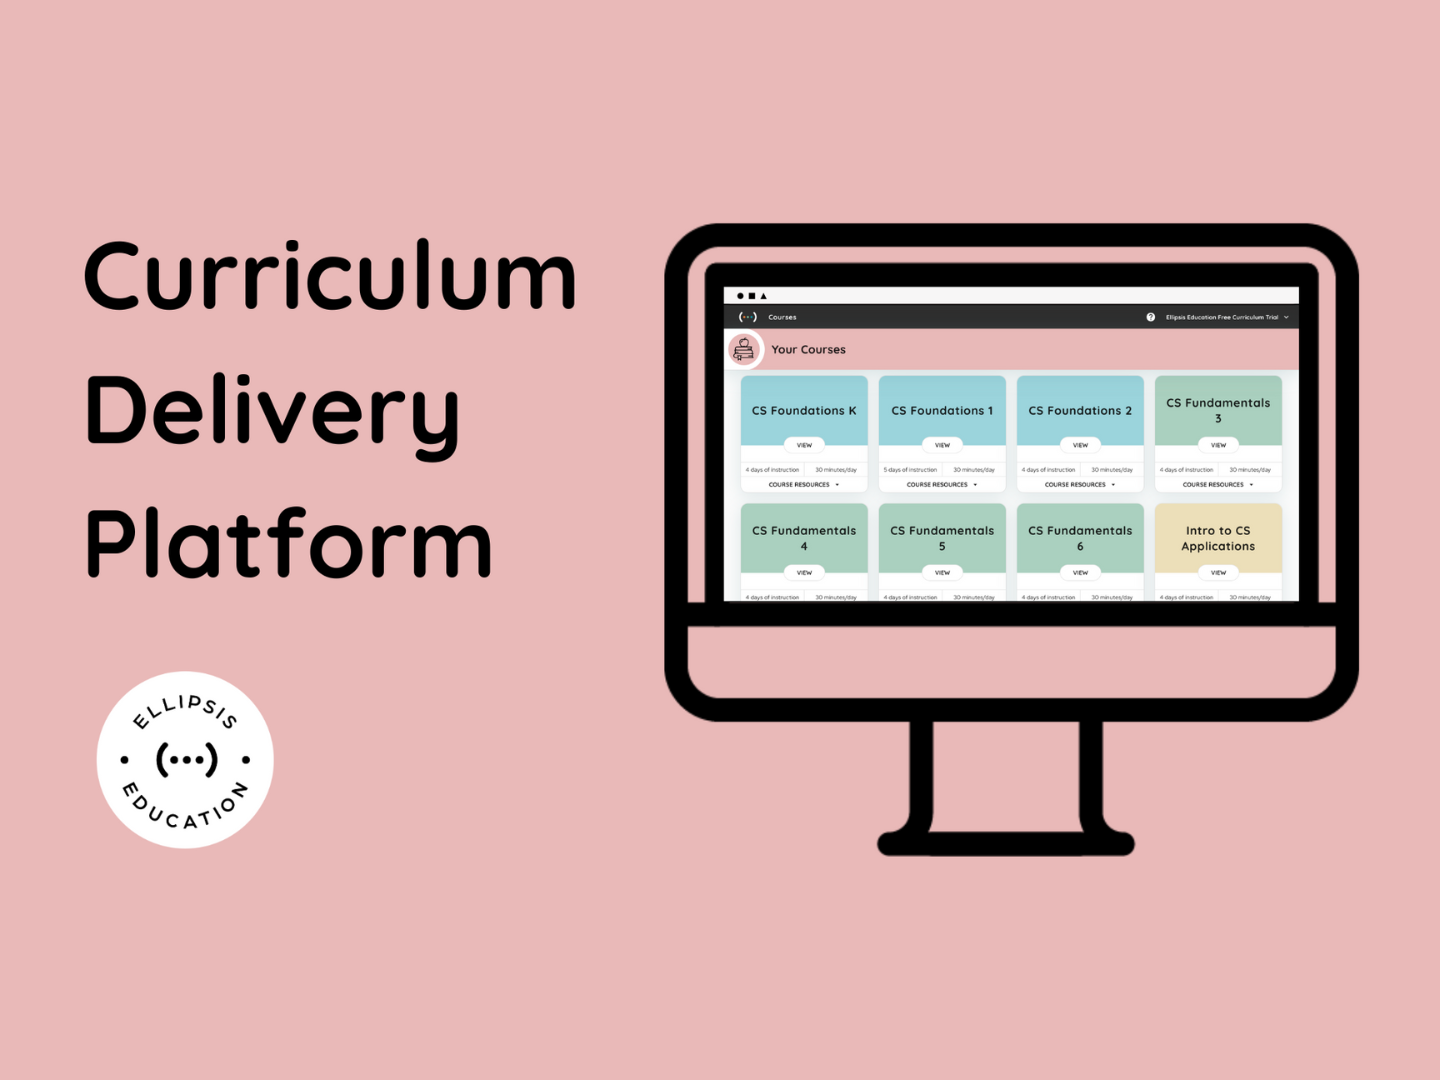 Introducing the Curriculum Delivery Platform